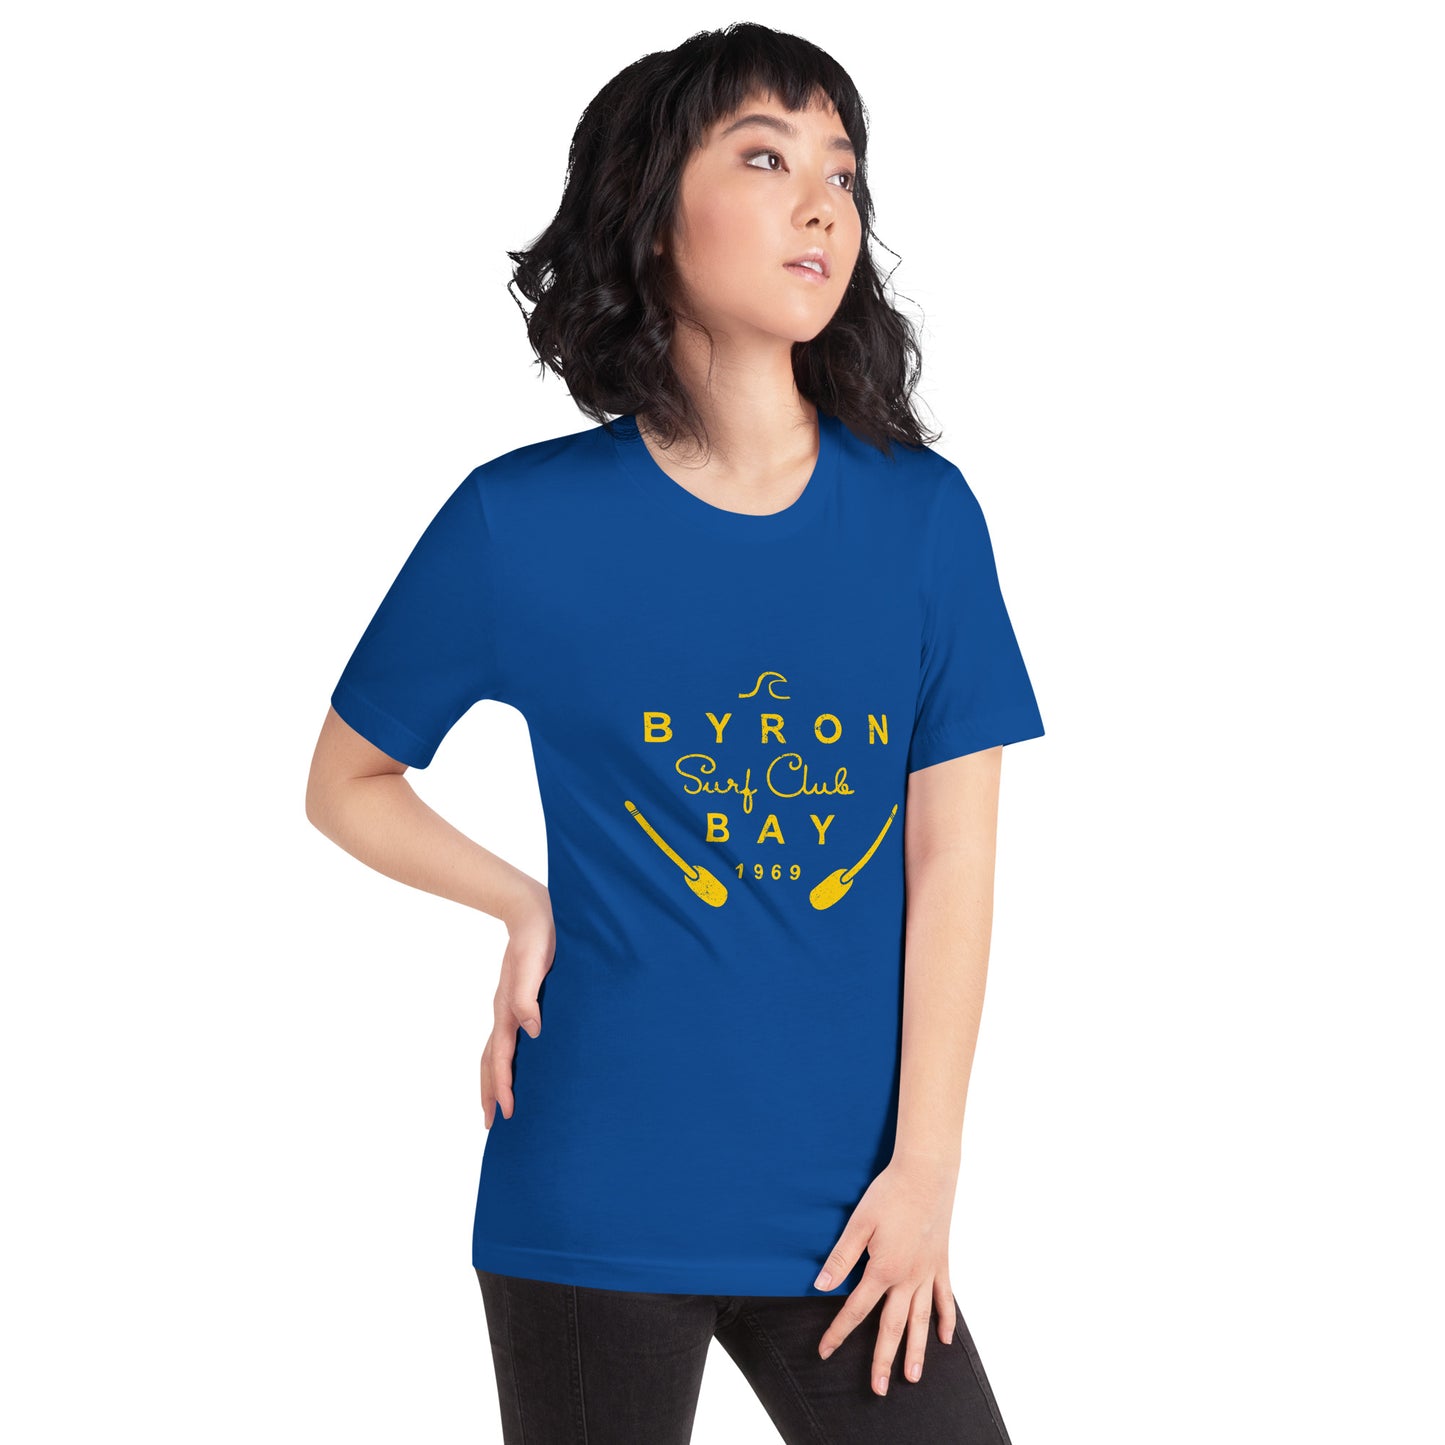  Unisex T-Shirt - True Royal Blue - Front view, on woman with on hand on hip - yellow Byron Bay Surf Club logo on front - Genuine Byron Bay Merchandise | Produced by Go Sea Kayak Byron Bay 